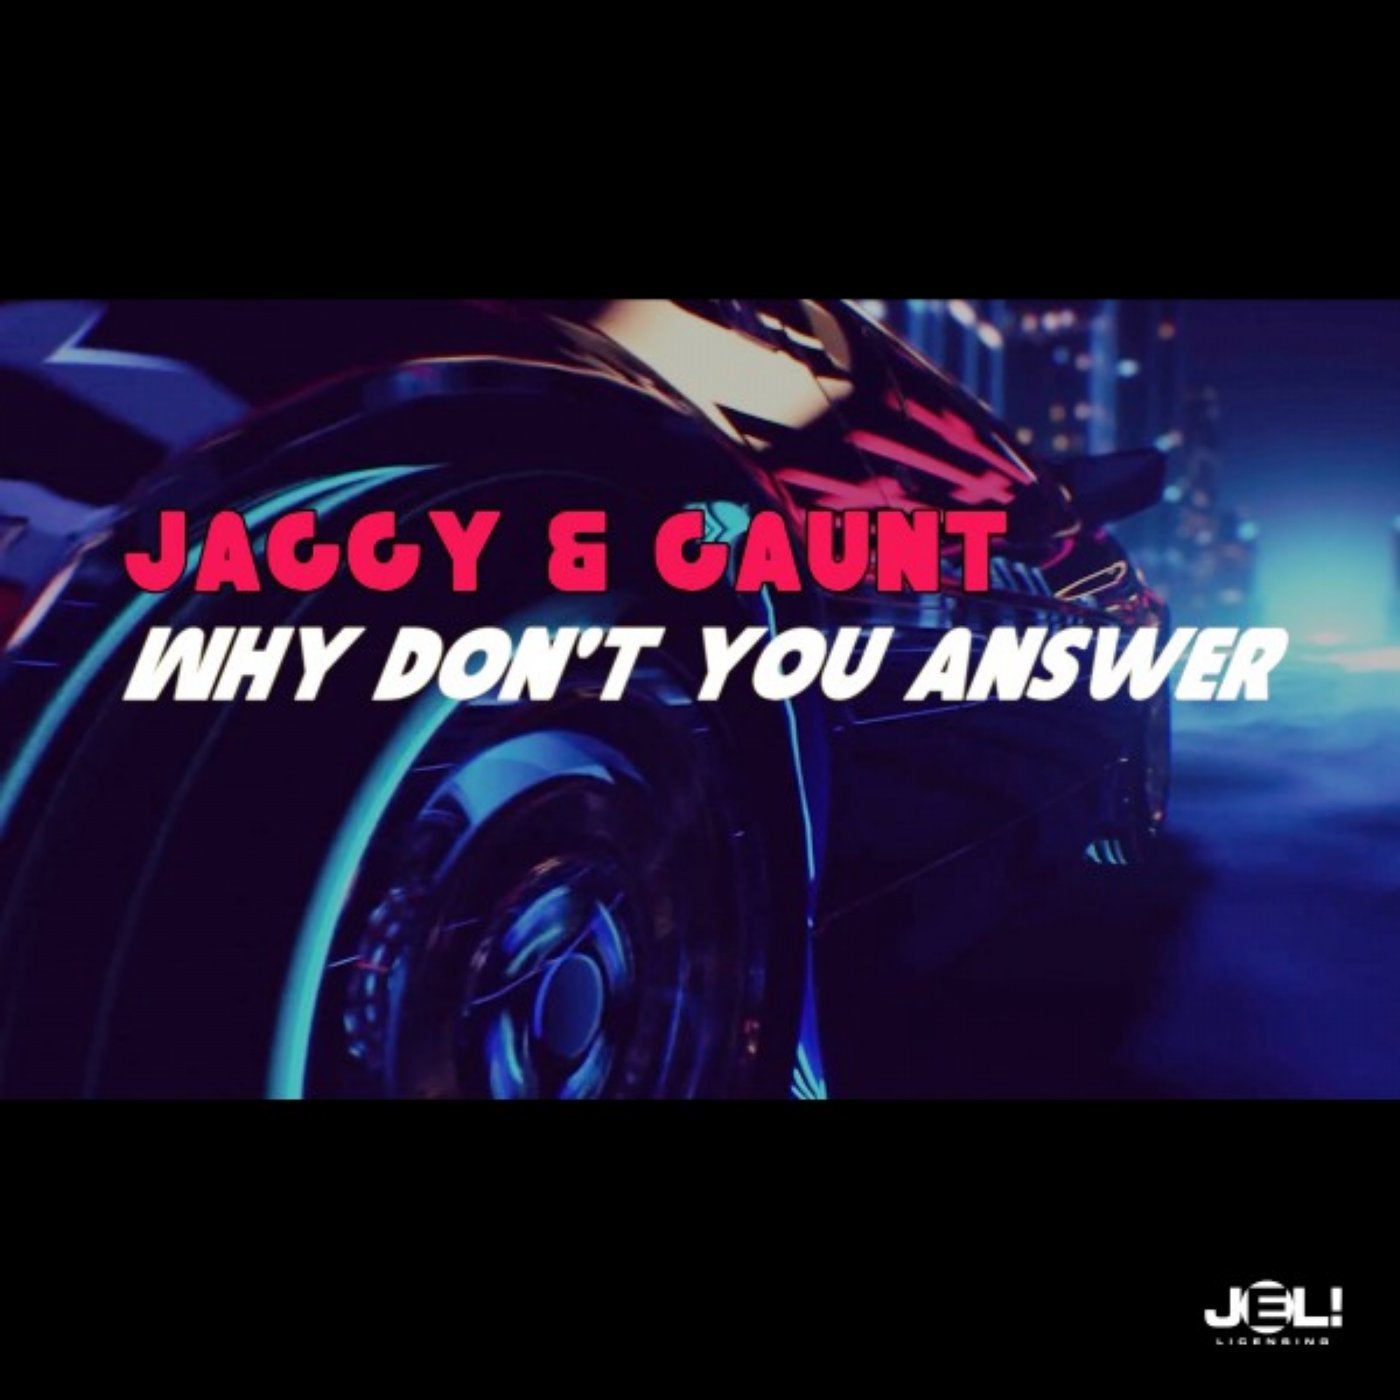 Jaggy & Gaunt - Why Don't You Answer